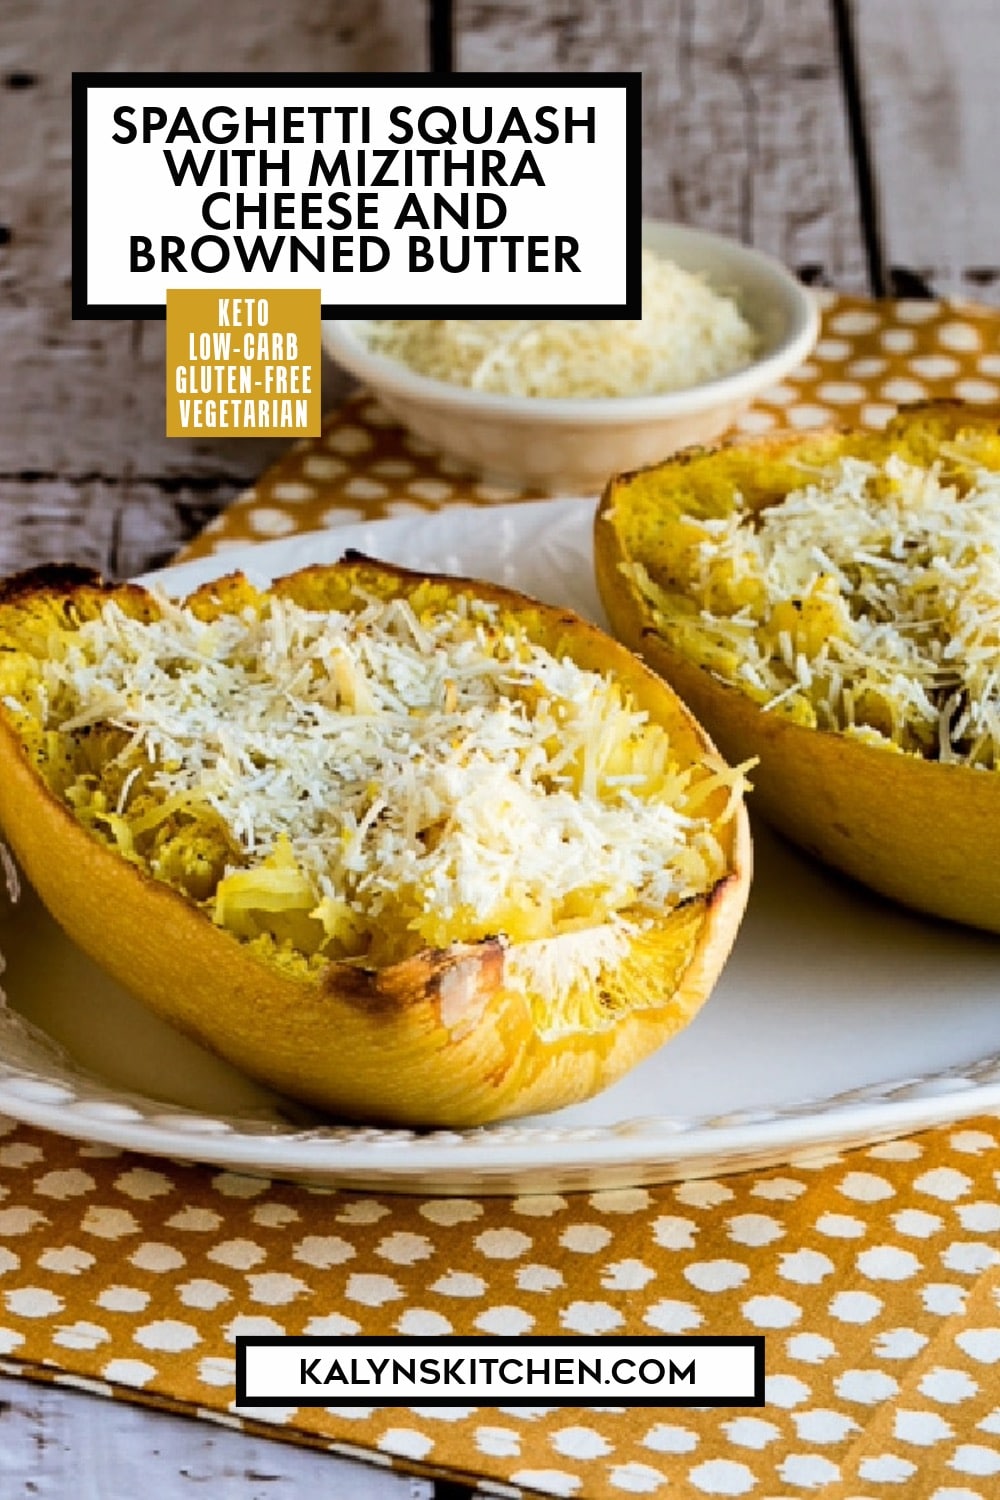 Pinterest image of Spaghetti Squash with Mizithra Cheese and Browned Butter